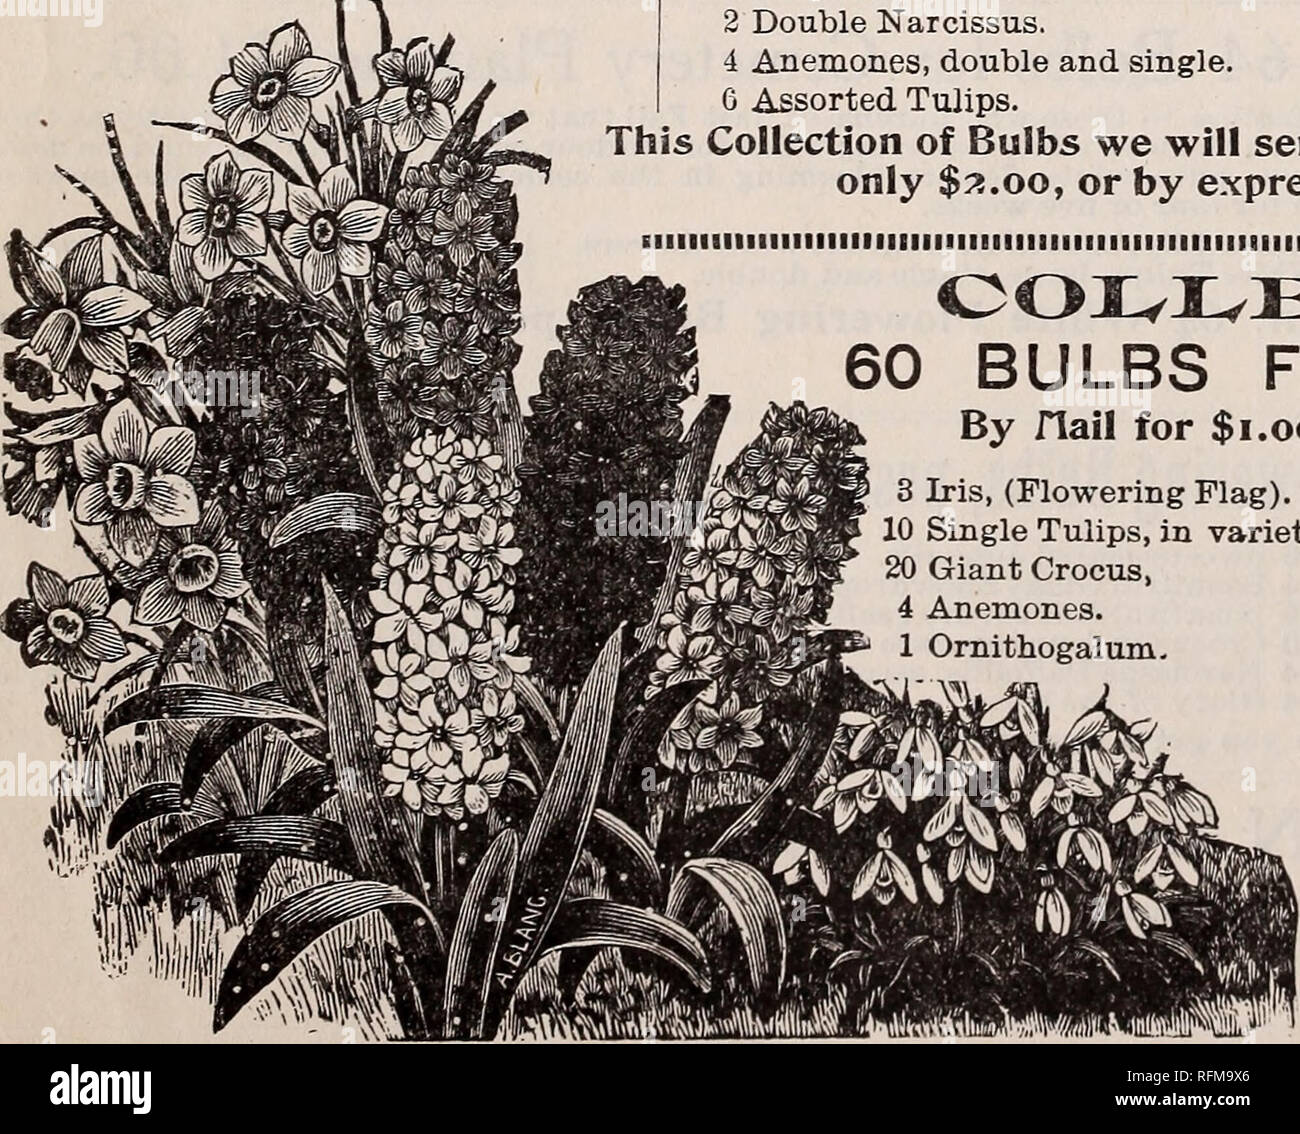 . Illustrated catalogue of bulbs, roses and plants : for winter and spring blooming, and fruits for fall planting. Nursery stock Ohio Catalogs; Bulbs (Plants) Catalogs; Flowers Seeds Catalogs; Plants, Ornamental Catalogs; Fruit Catalogs. 1 Double Yellow Hyacinth. 4 Single Assorted Hyacinths. 1 Rose Roman Hyacinth. 2 Grape Hyacinths.!. 6 Assorted Parrot Tulips. 2 Cockade Hyacinths. 6 Assorted Double Tulips. 6 Assorted Bybloom Tulips. 6 Freesia. 5 Scilla. 4 Jonquils. 20 Assorted Crocus. 1 Single Yellow Hyacinth. 4 Double Assorted Hyacinths. 2 White Roman Hyacinths. 1 Paper &quot;White Narcissus. Stock Photo